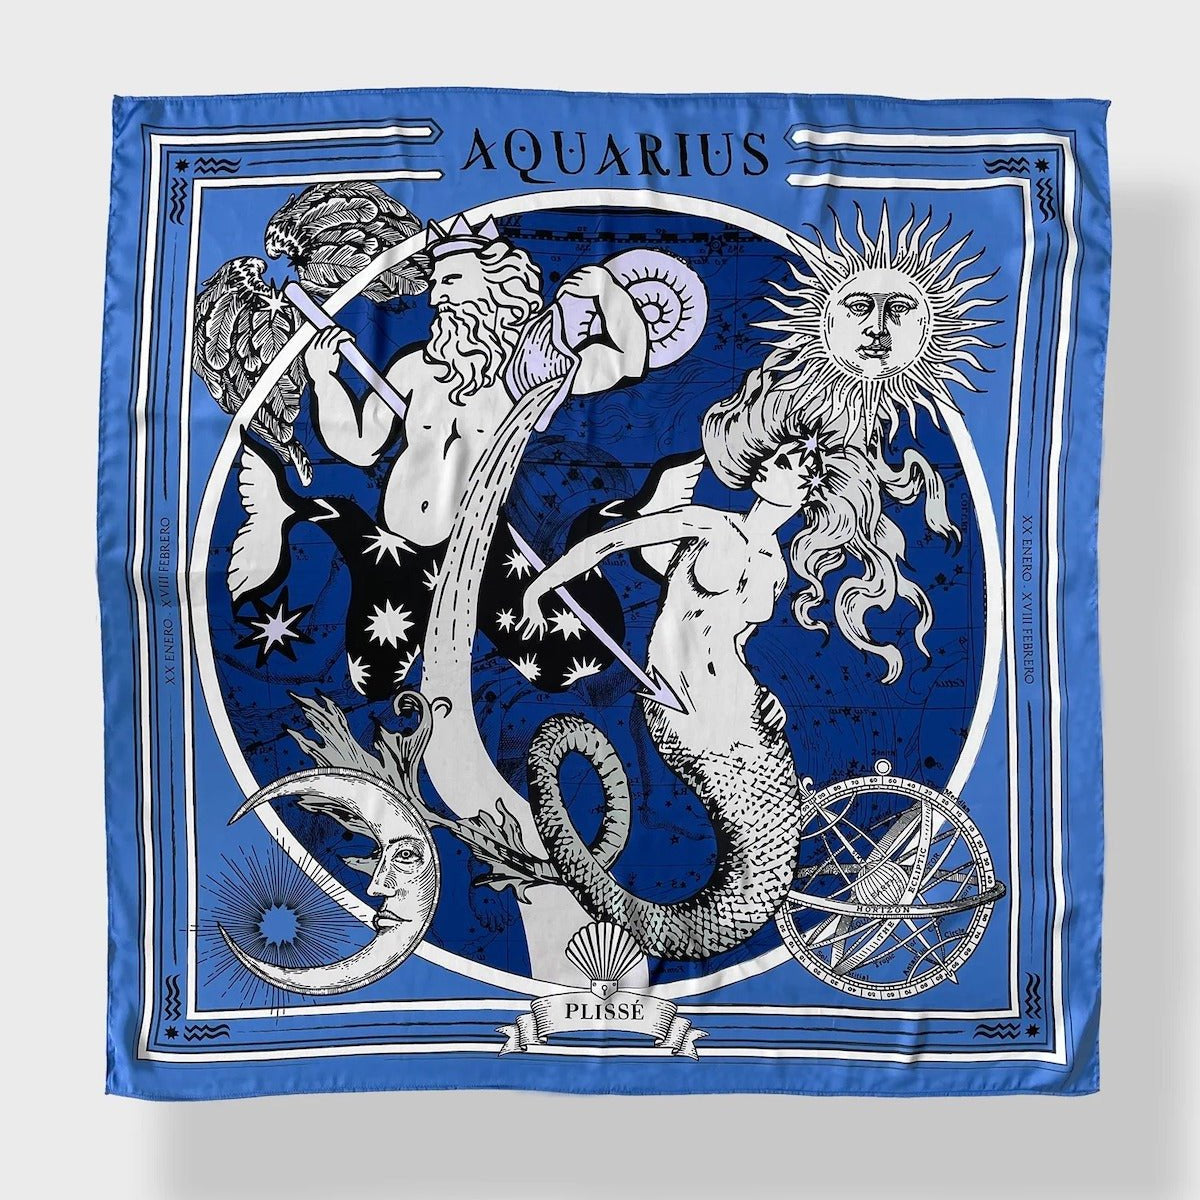 Zodiac Scarf for Aquarius by Plissé. Image of water bearer, mermaid, sun, moon, and the eliptic. The blue scarf is pictured on a white background.